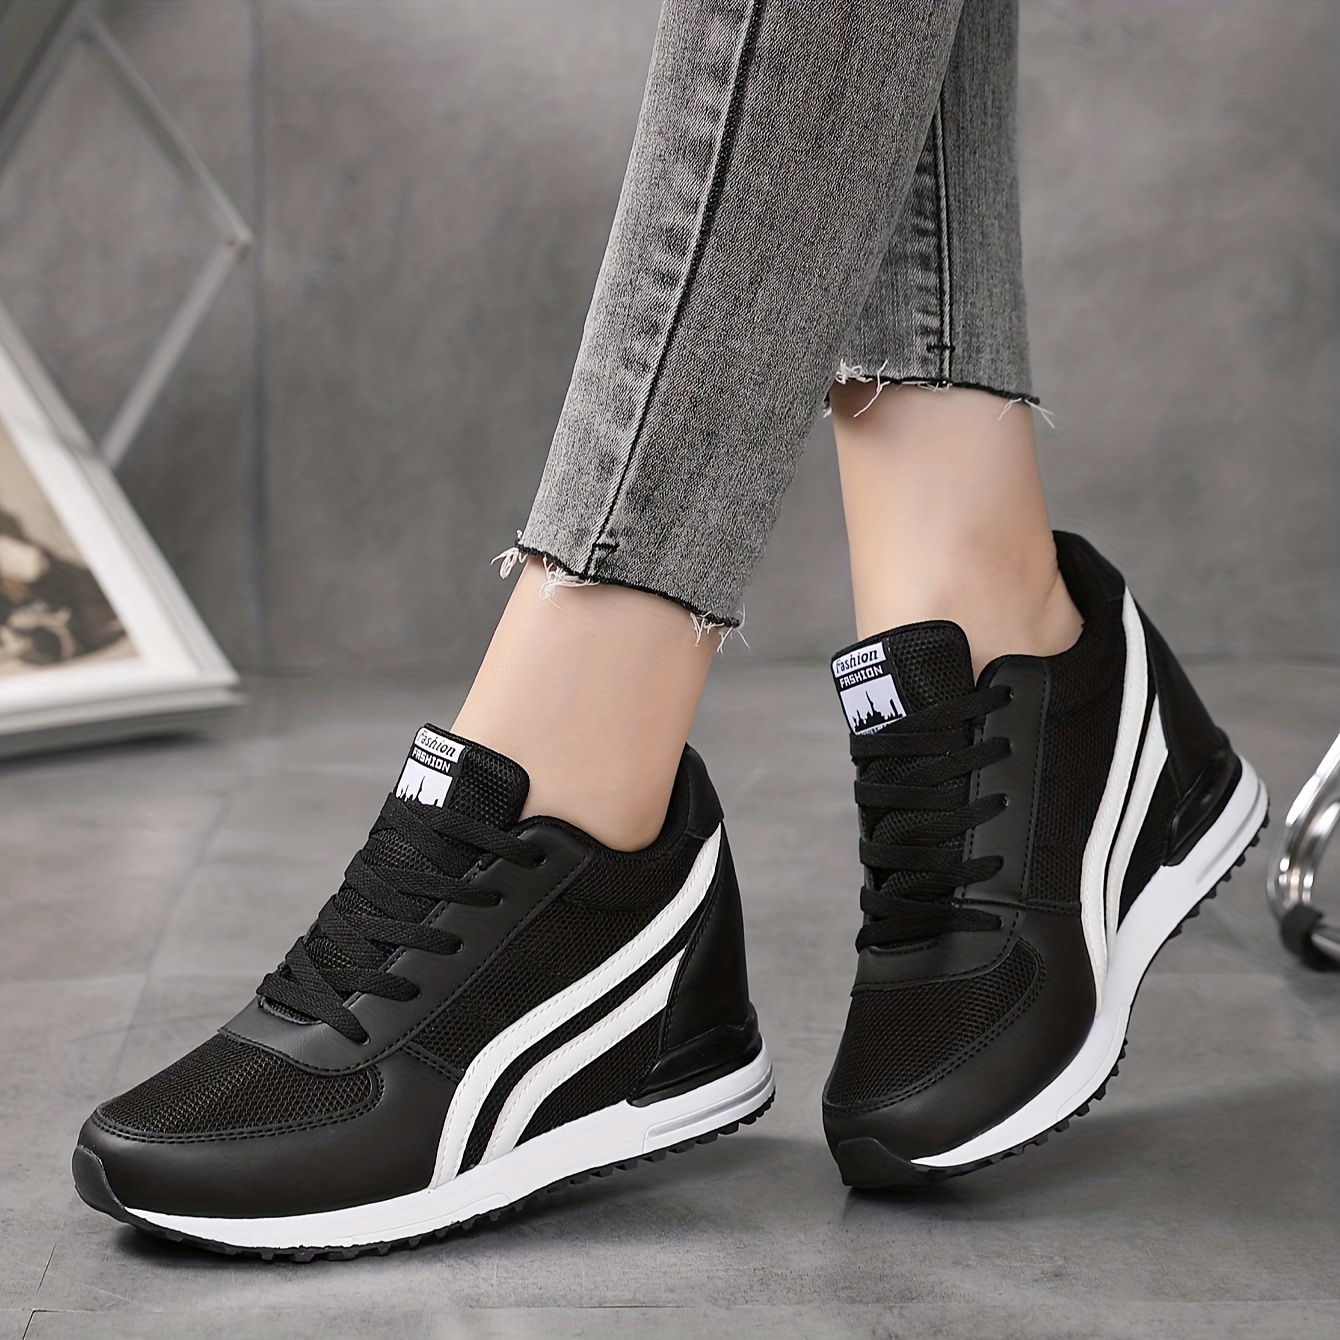  Womens Platform Shoes Hidden Wedge 3 Inches Height Increase,  Canvas Sneakers High Heel White Black Fashion Sneakers for Women and Girls